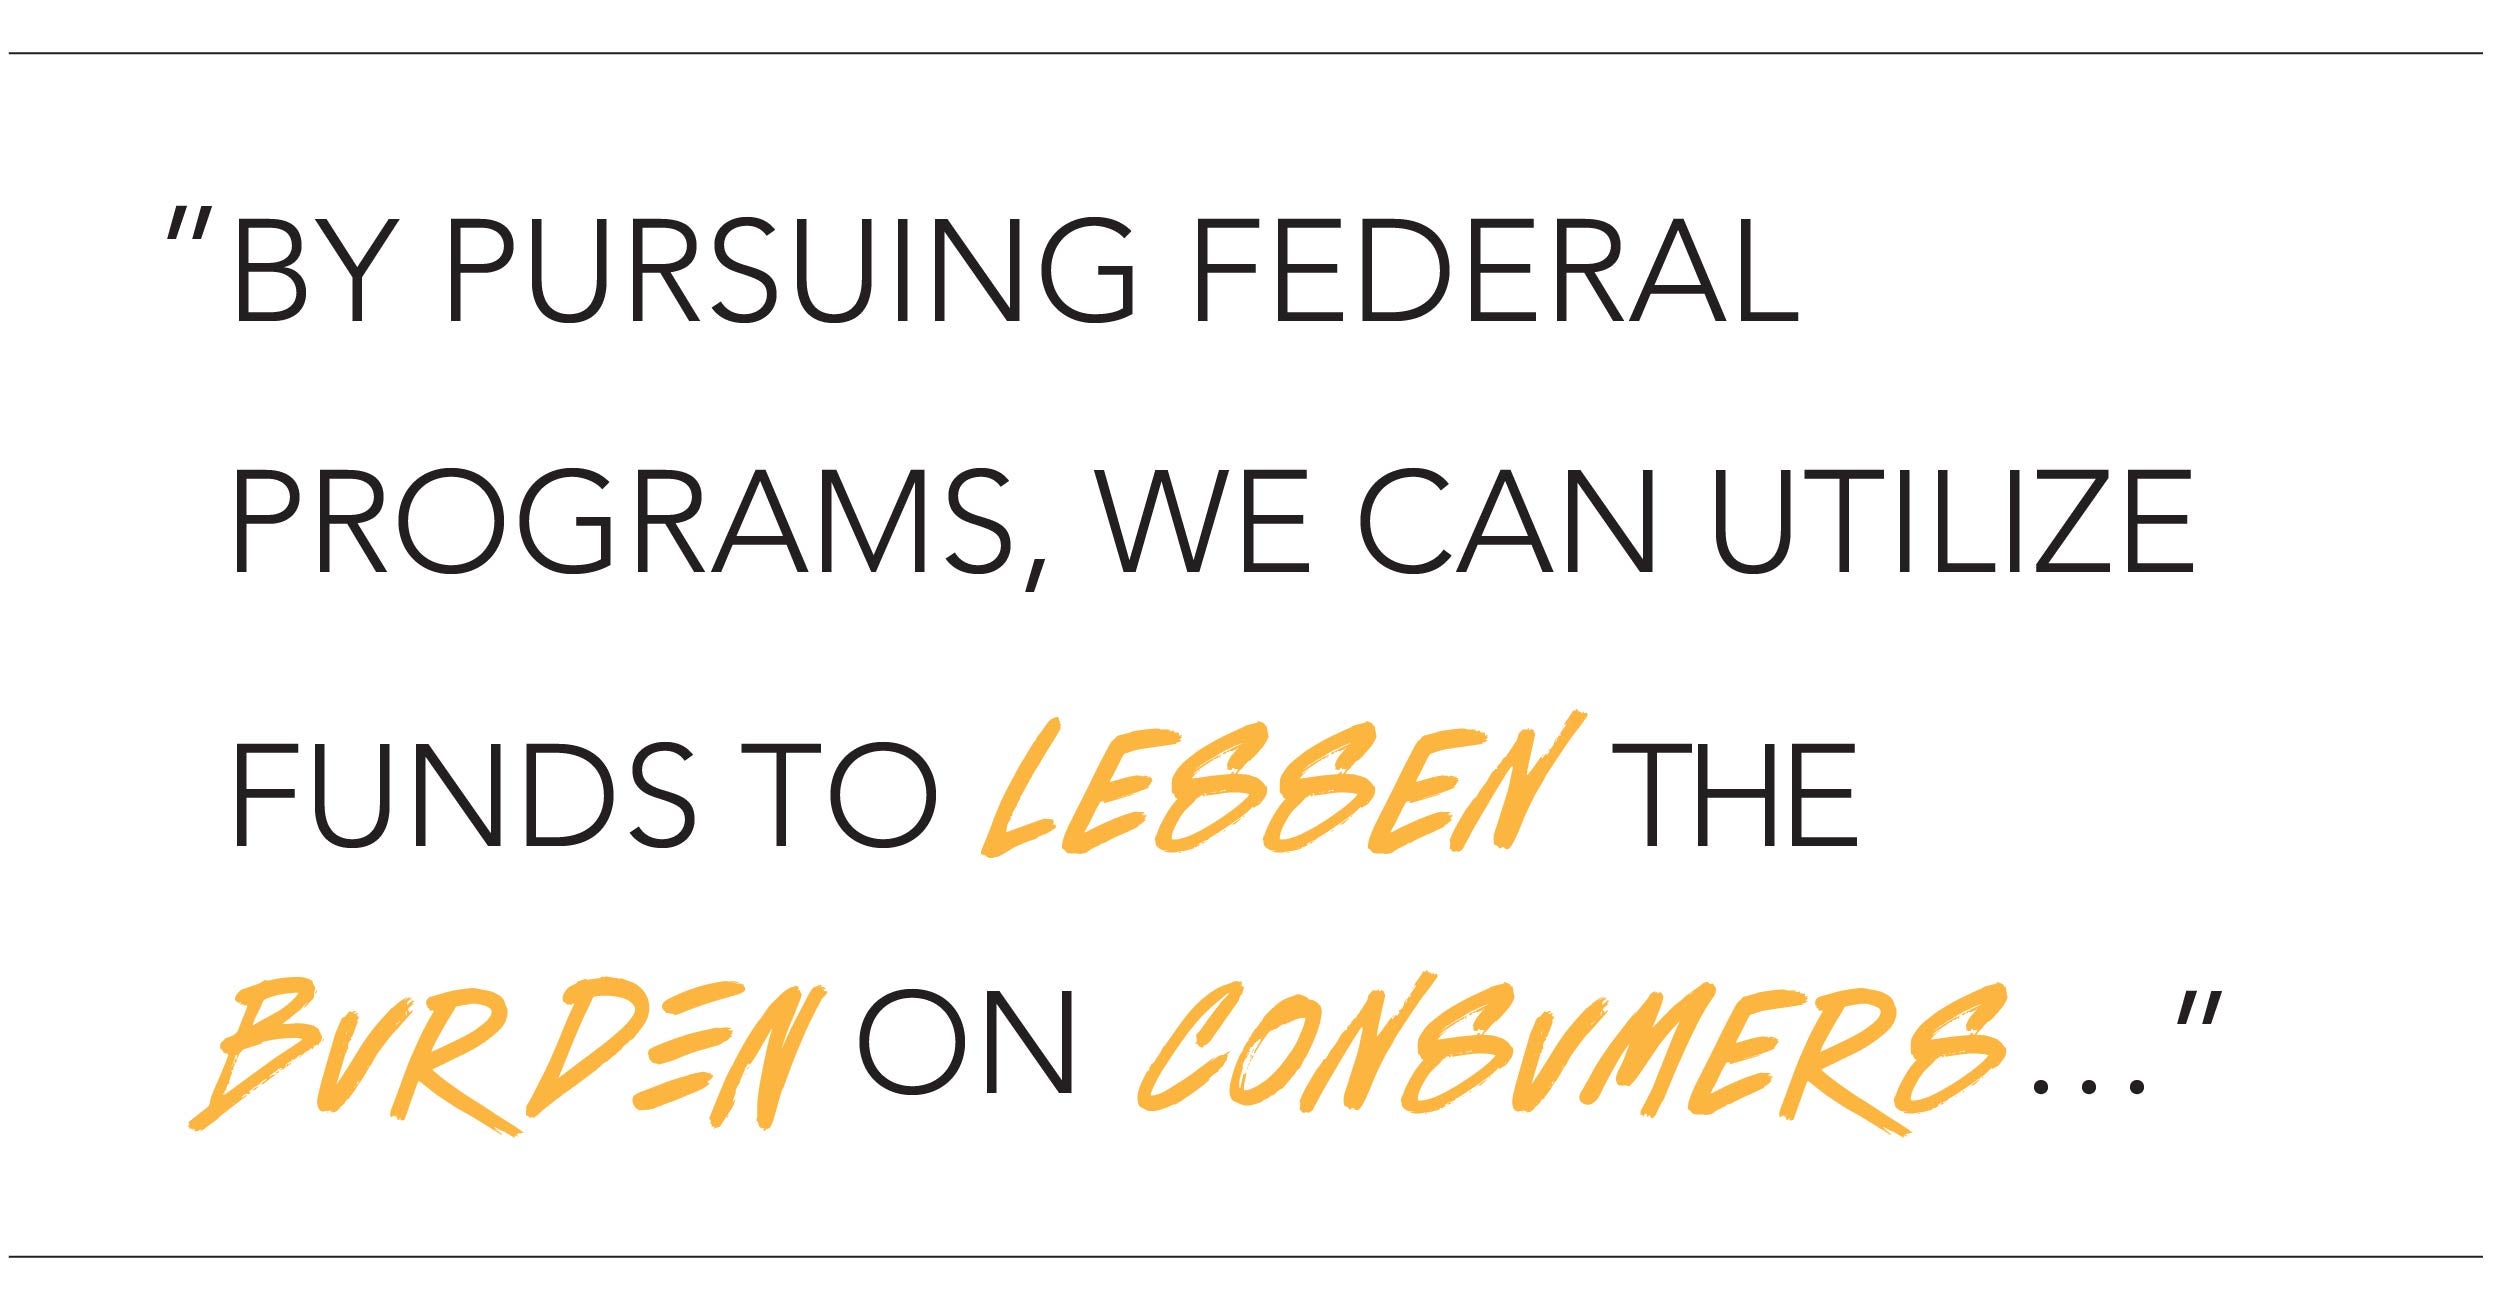 By pursing federal programs, we can utilize funds to lessen the burden on consumers...